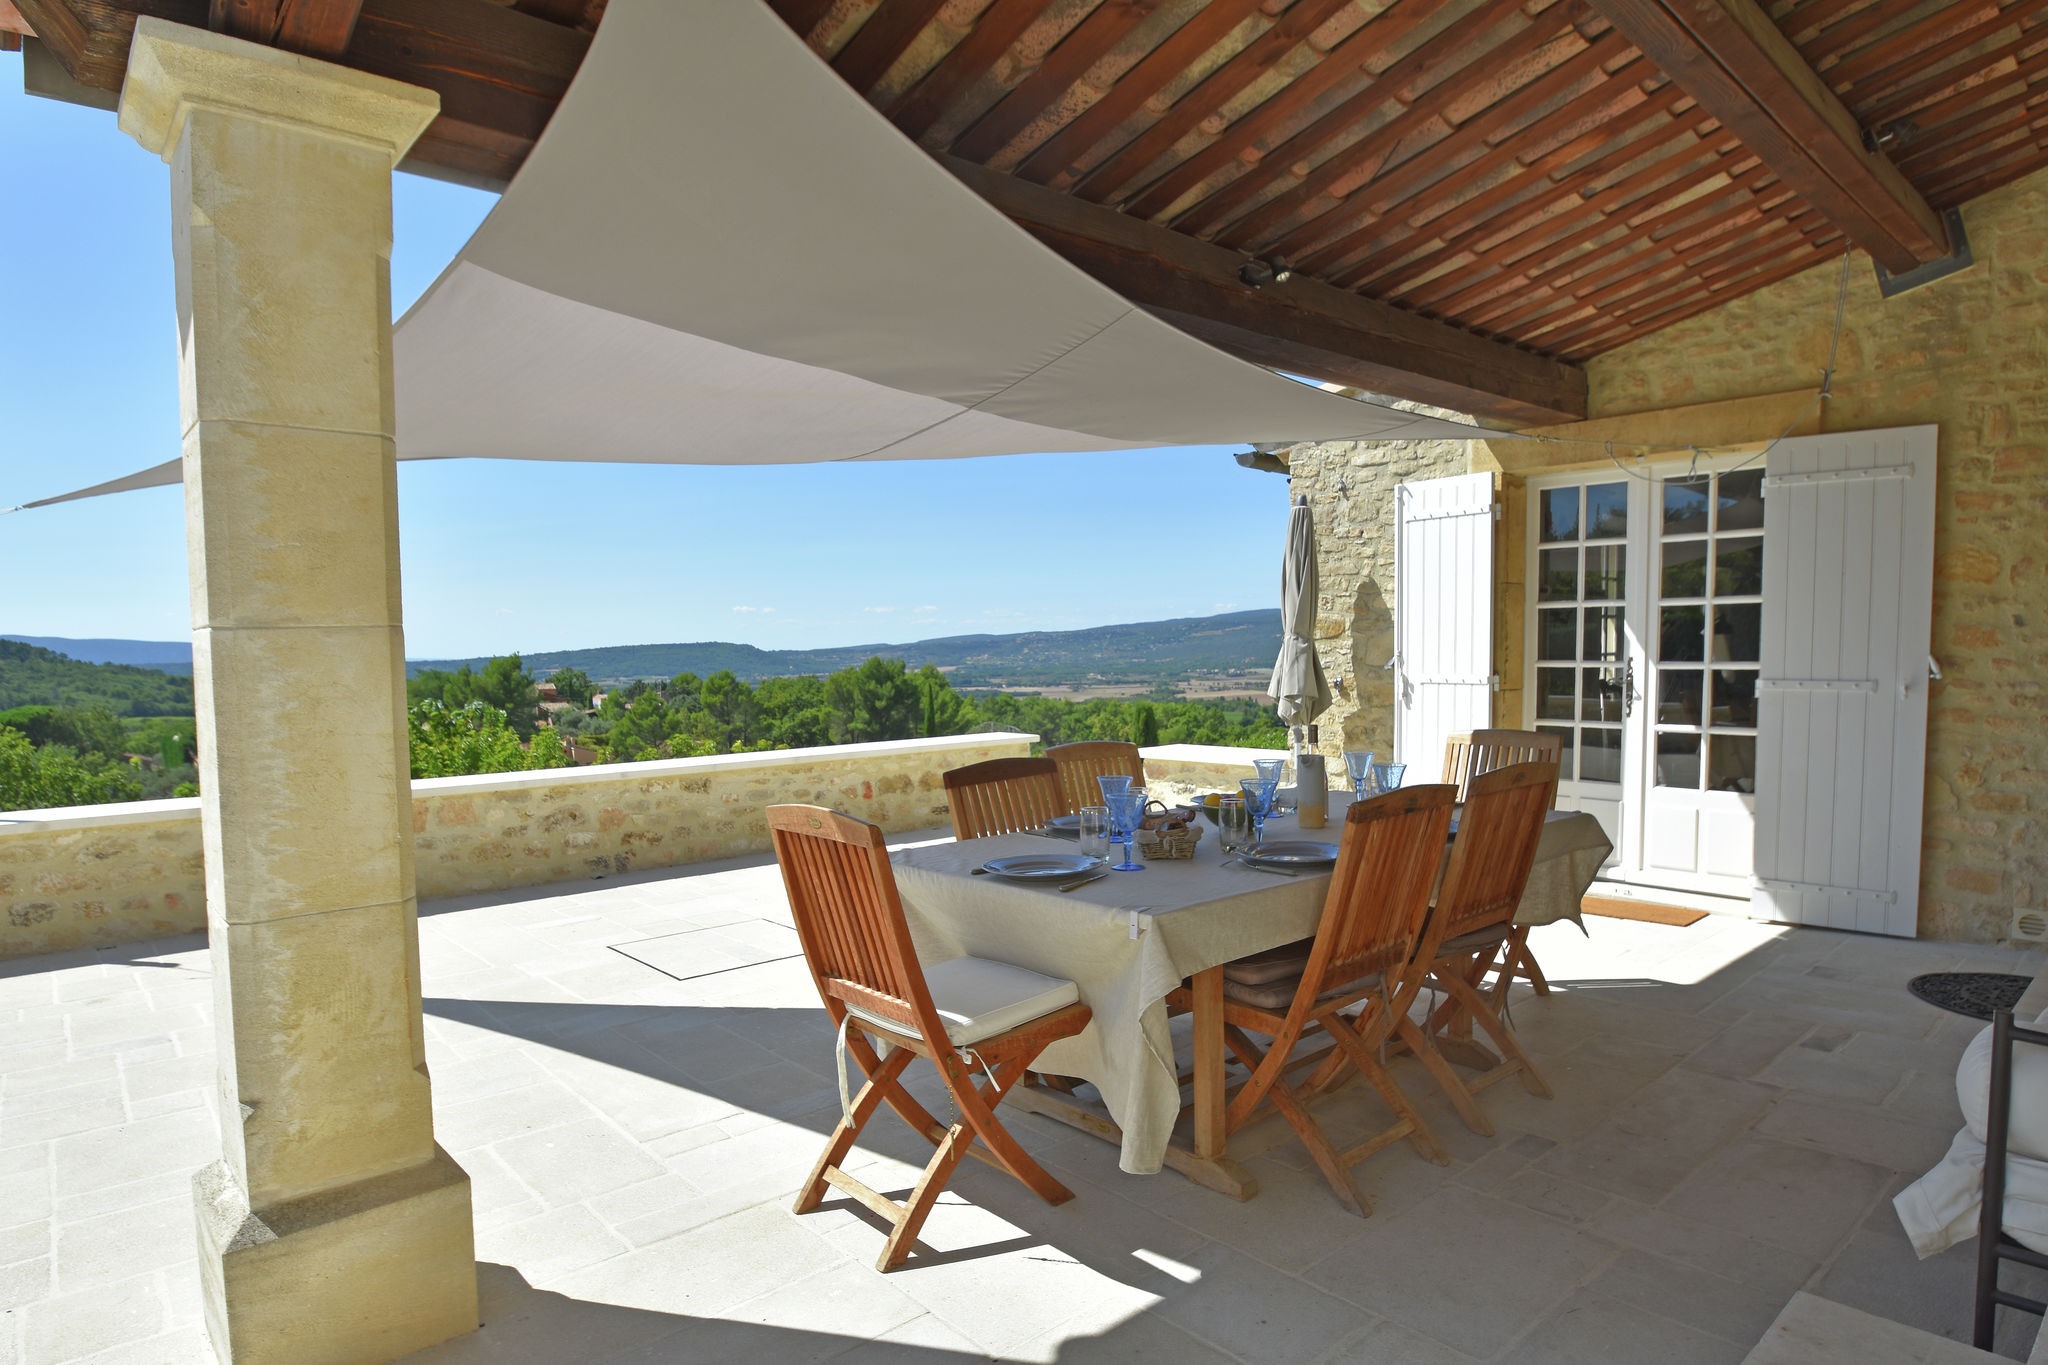 Villa with private pool and views of the Luberon